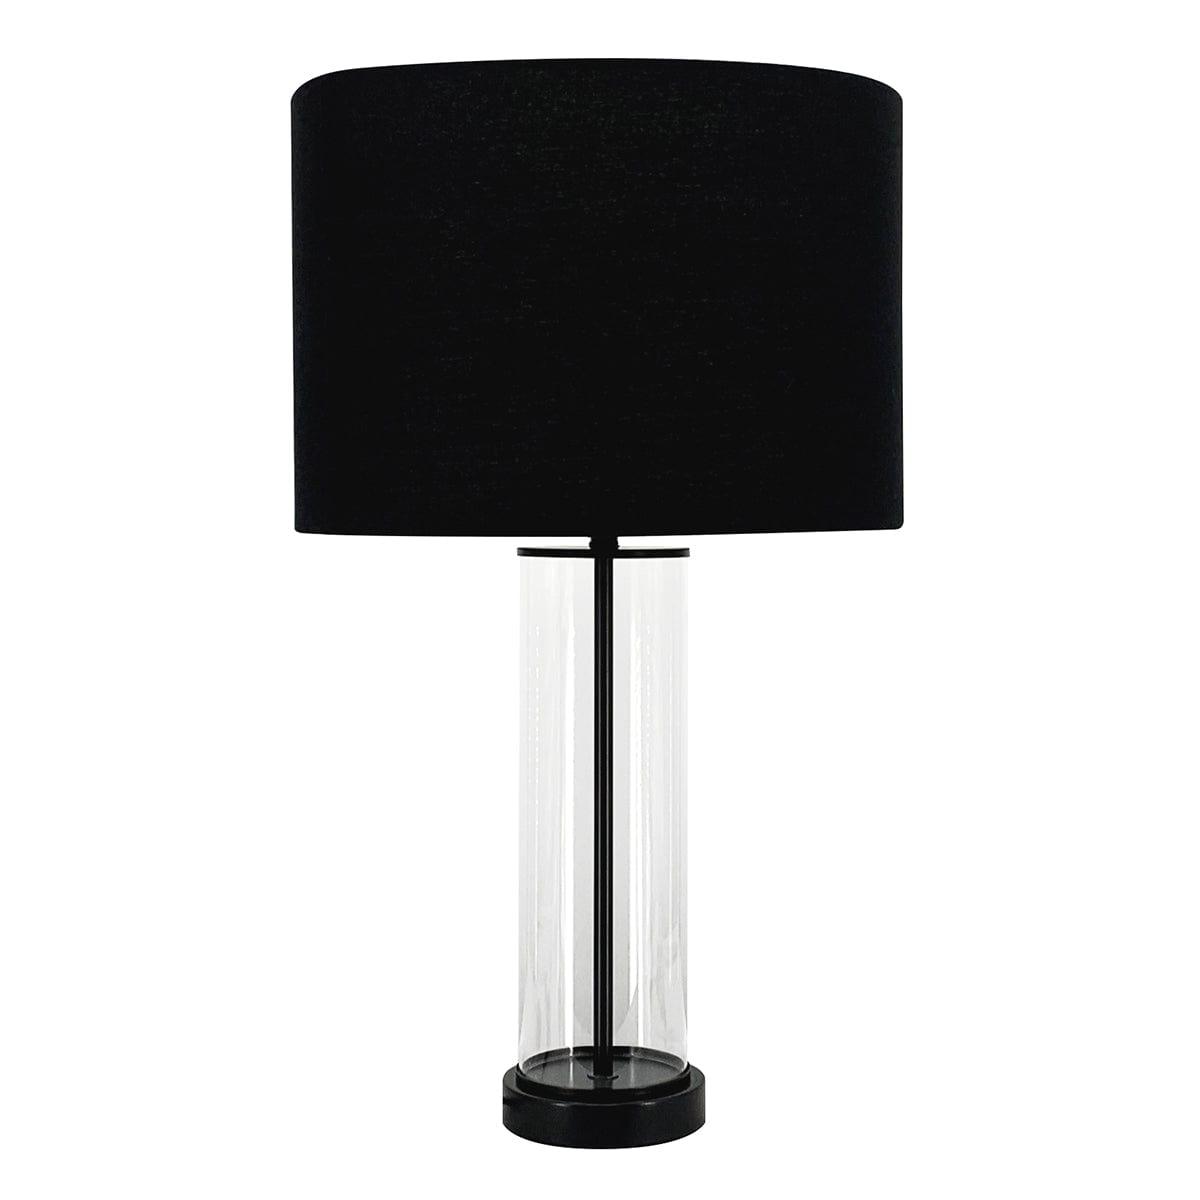 House Journey Table Lamp East Side Table Lamp - Black